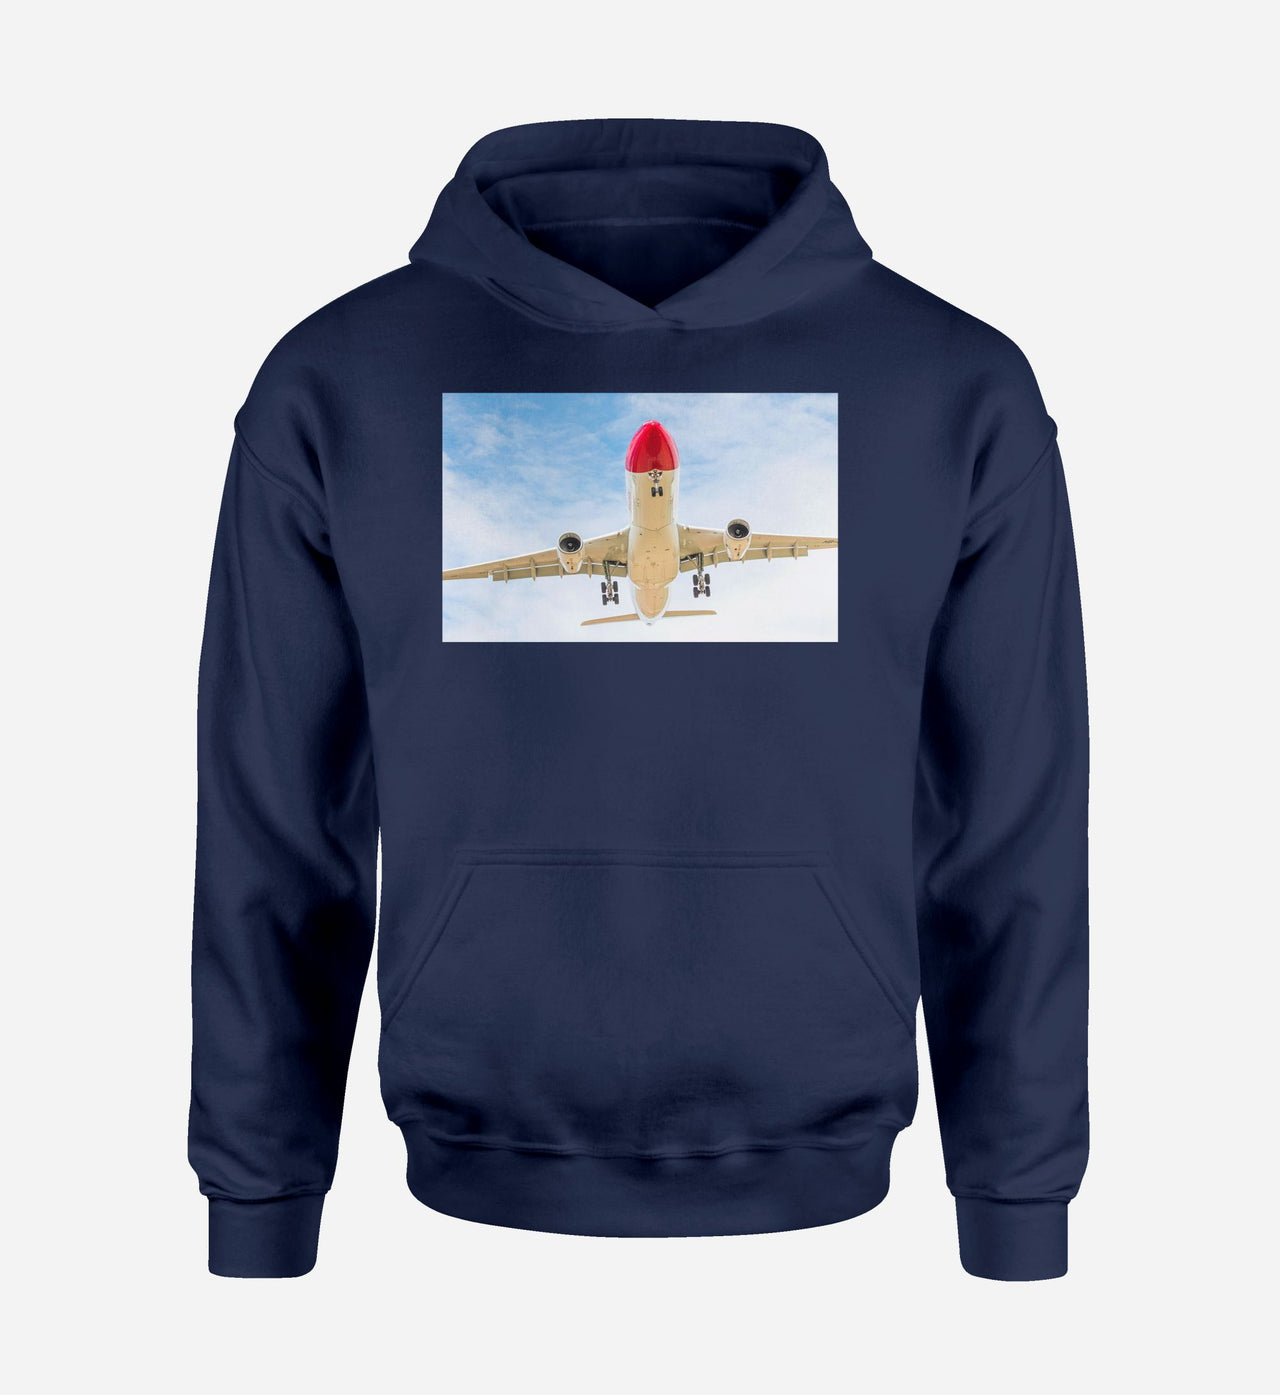 Beautiful Airbus A330 on Approach Designed Hoodies